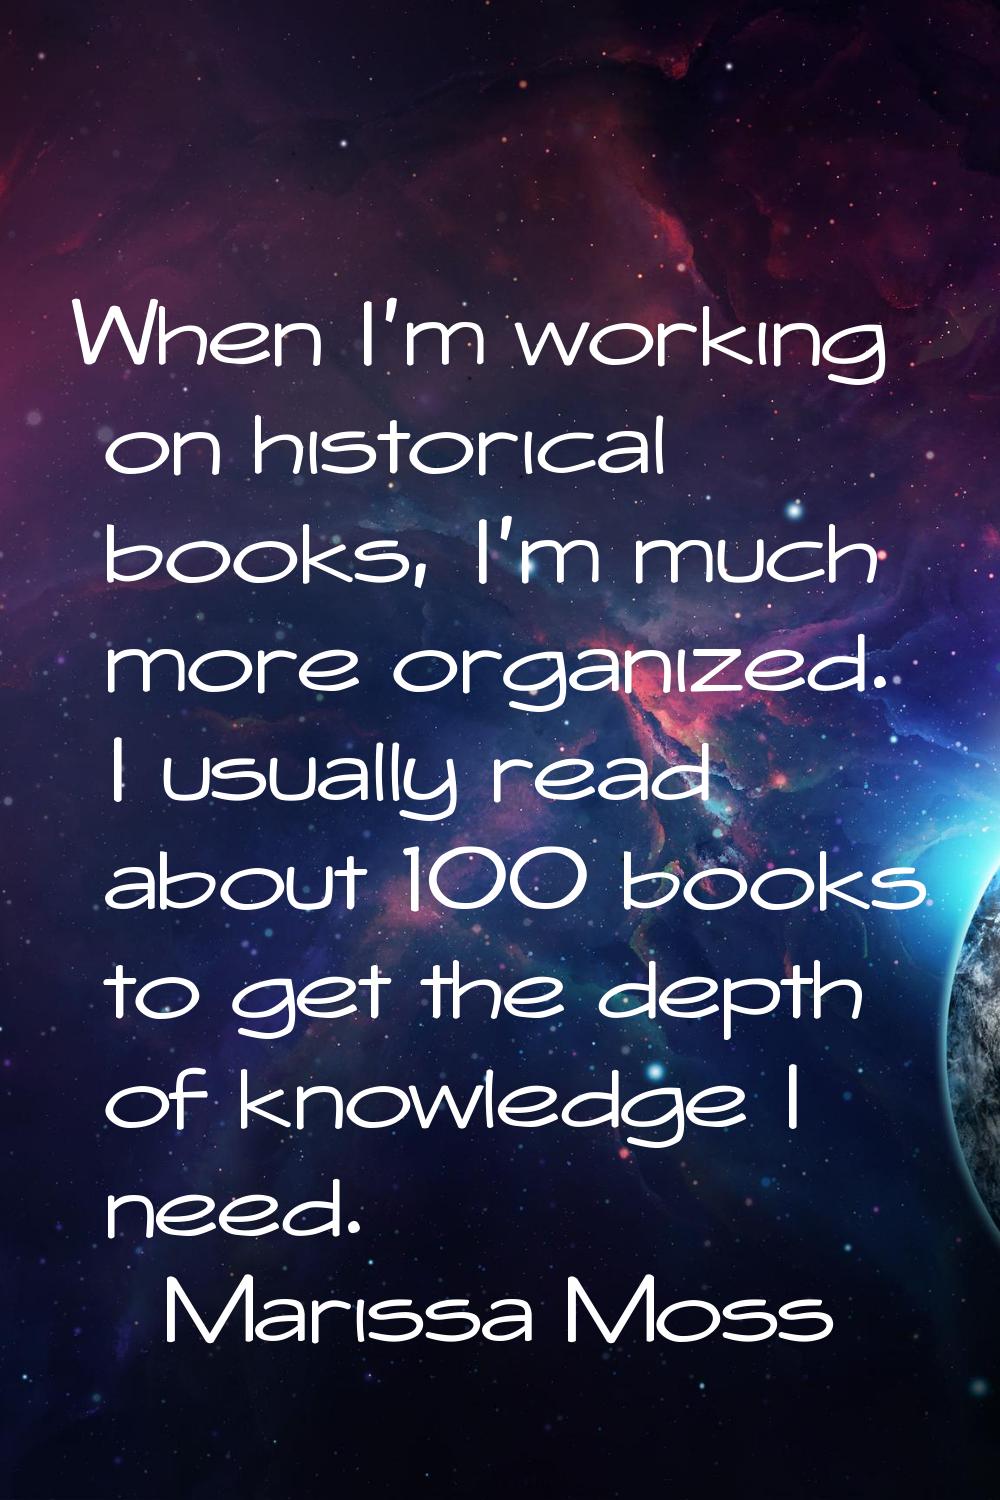 When I'm working on historical books, I'm much more organized. I usually read about 100 books to ge